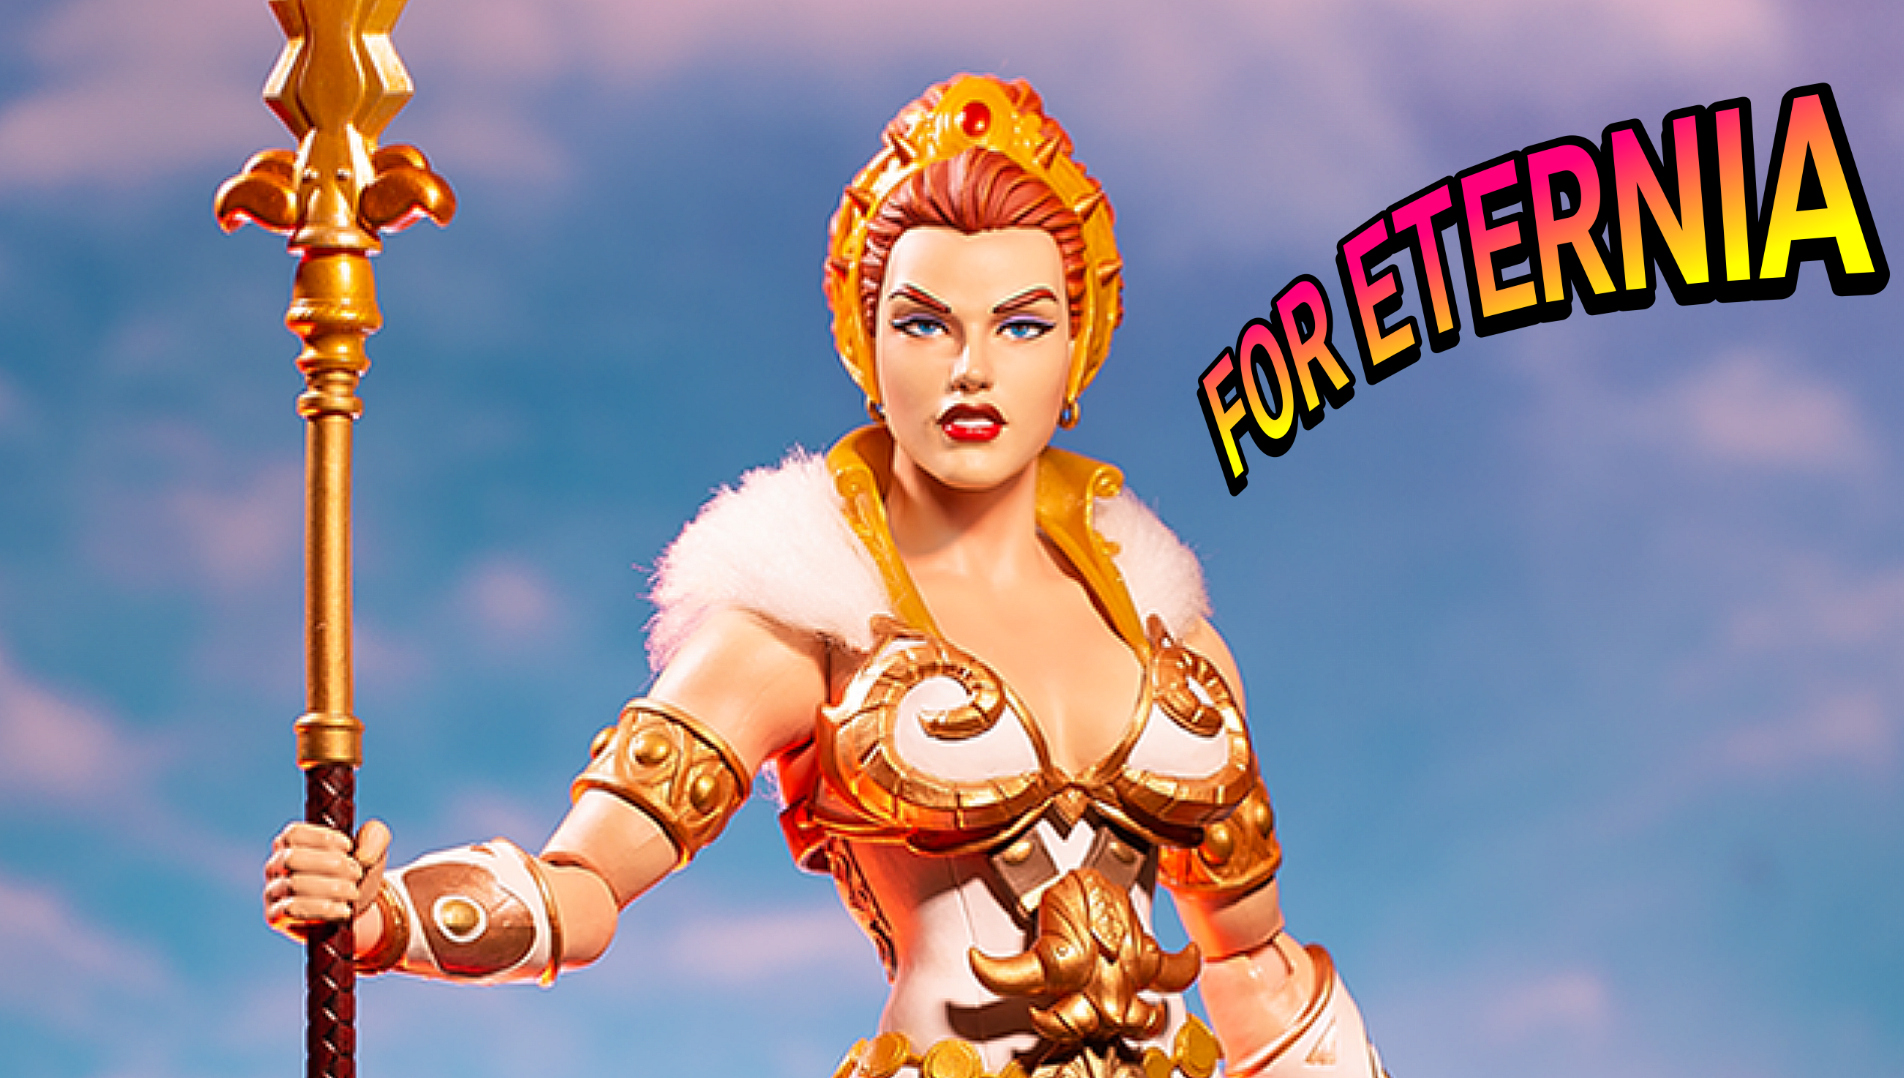 Pre-Orders for the Mondo TEELA 1:6 Scale ”Timed Edition” Figure begin Tomorrow, April 2nd